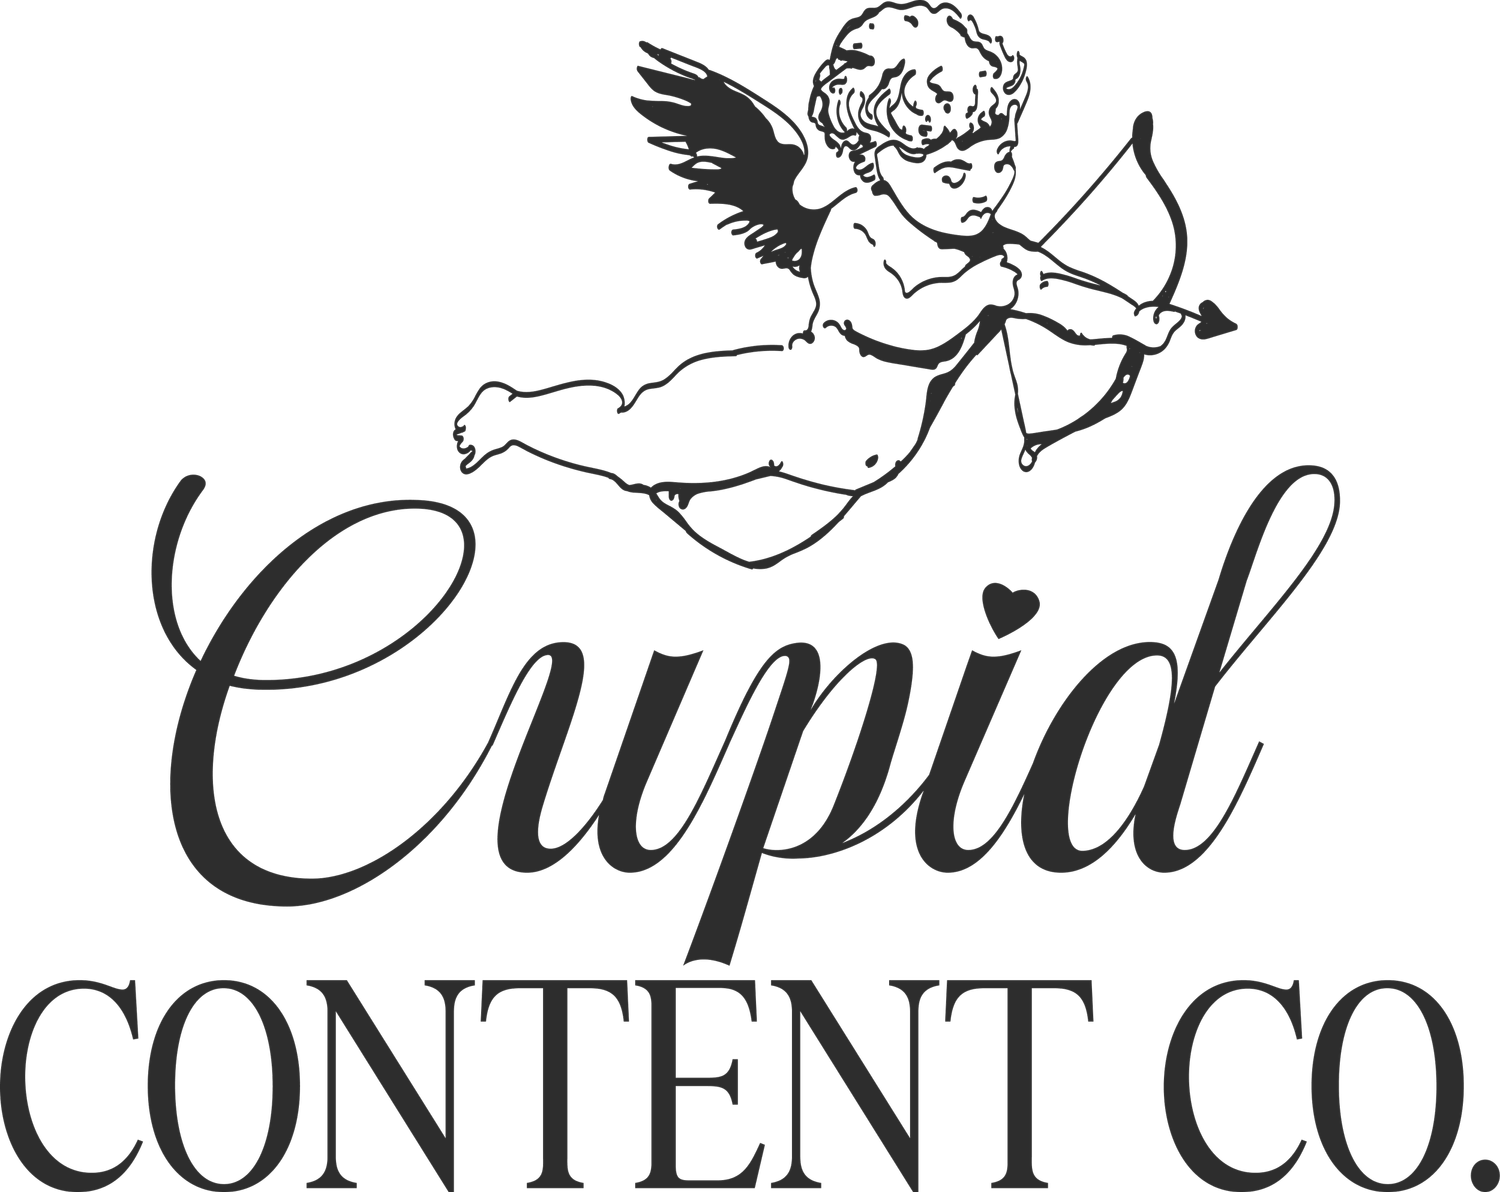 Cupid Content Co.